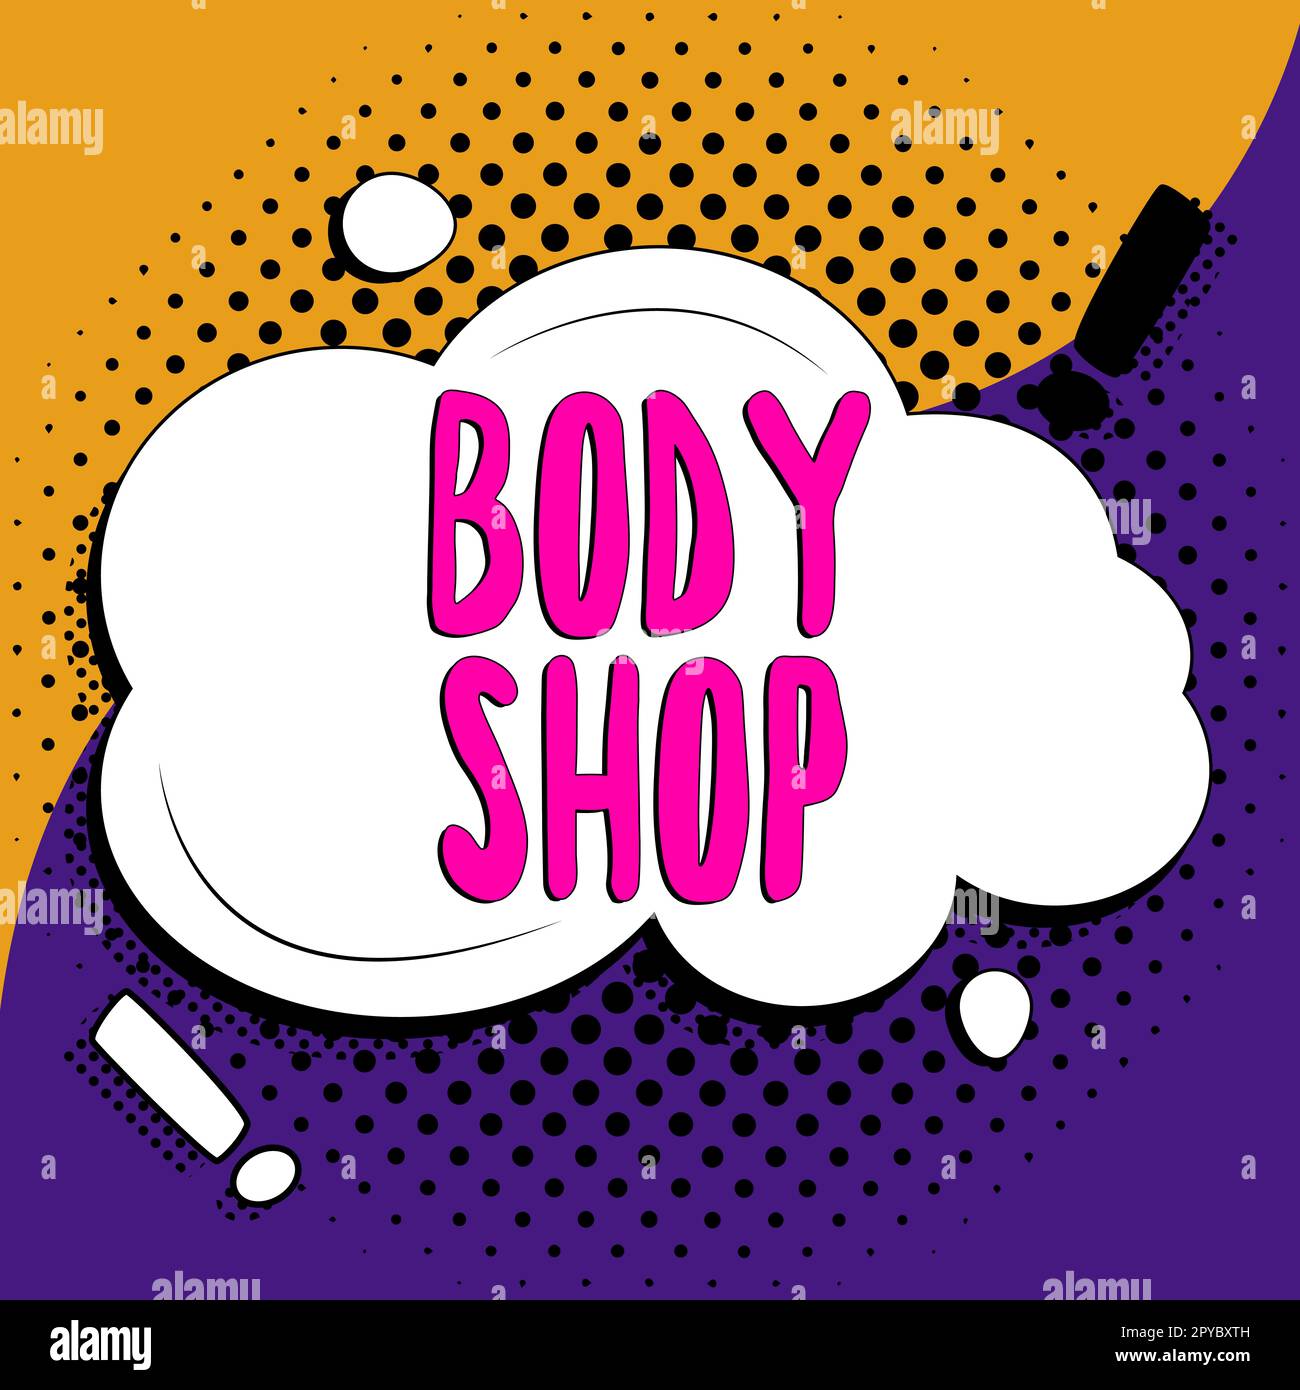 Text caption presenting Body Shop. Business concept a shop where automotive bodies are made or repaired Stock Photo